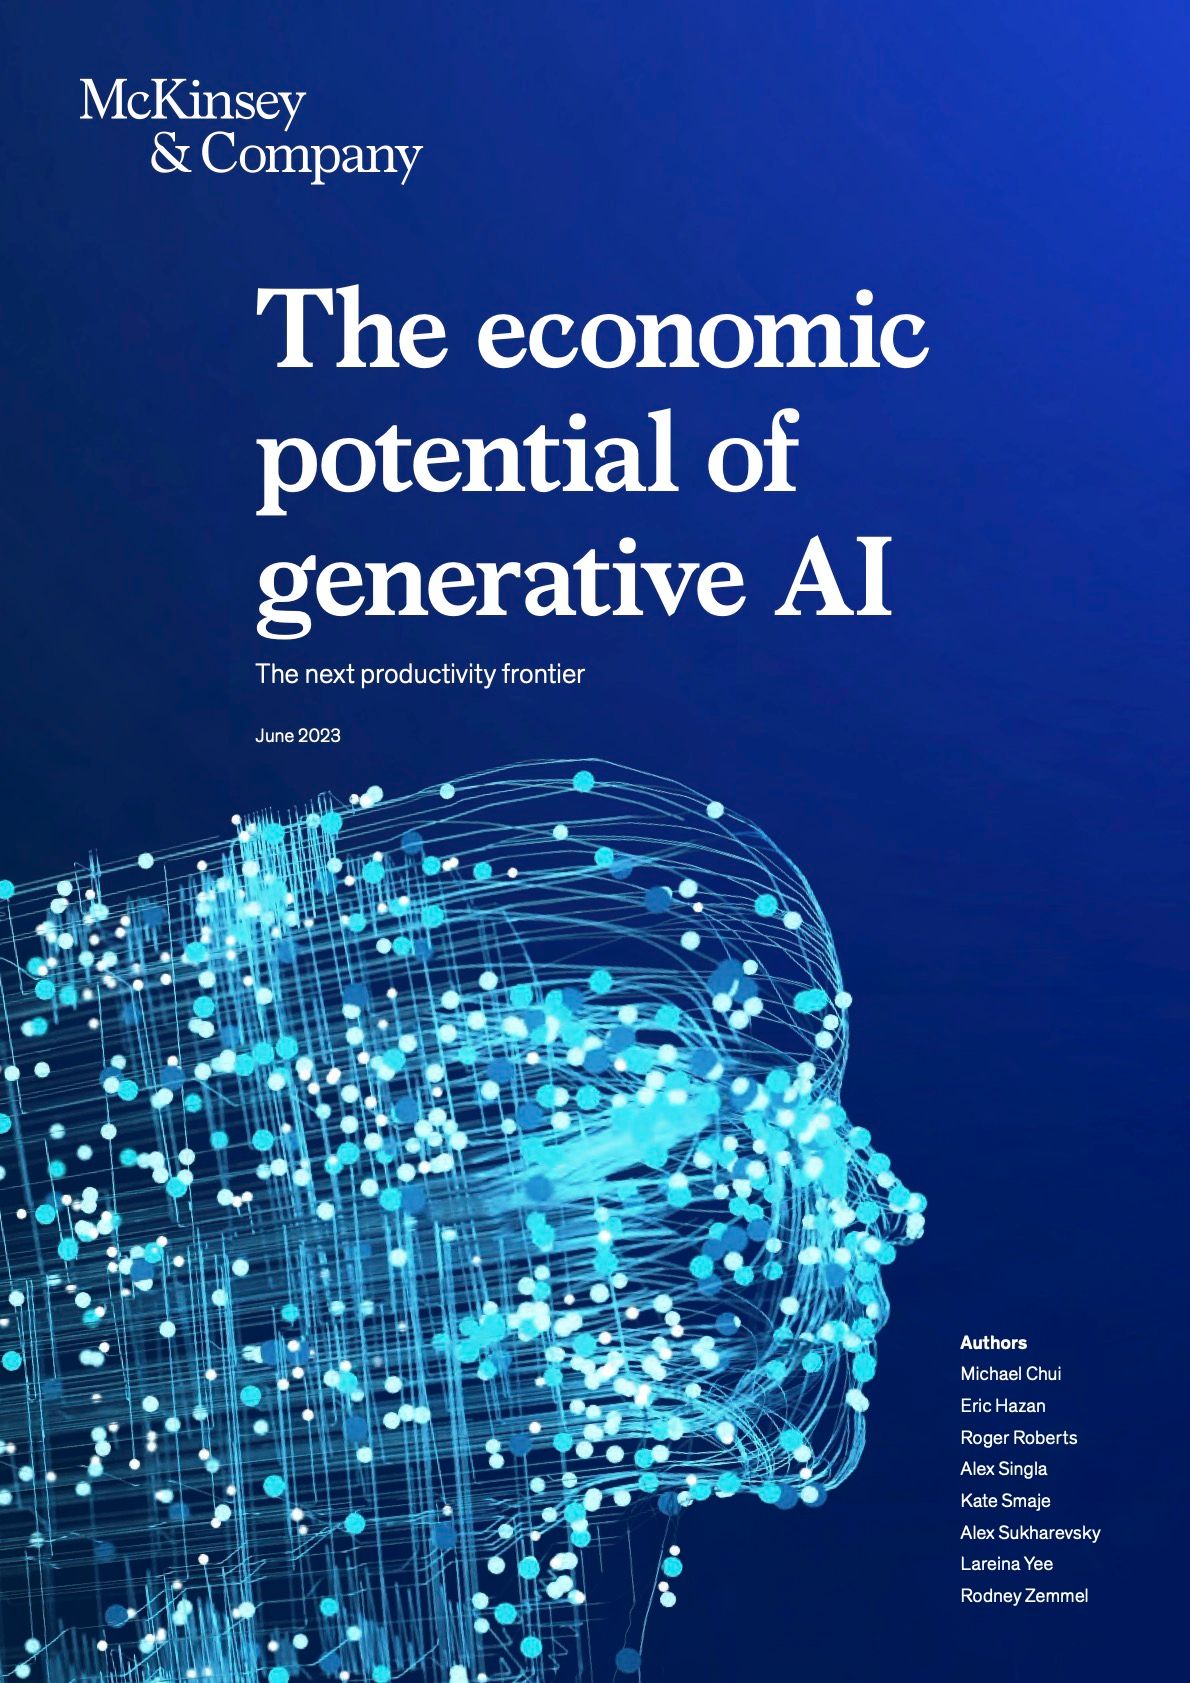 August 14, 2023, OP-ED - Selected document | The economic potential of generative AI